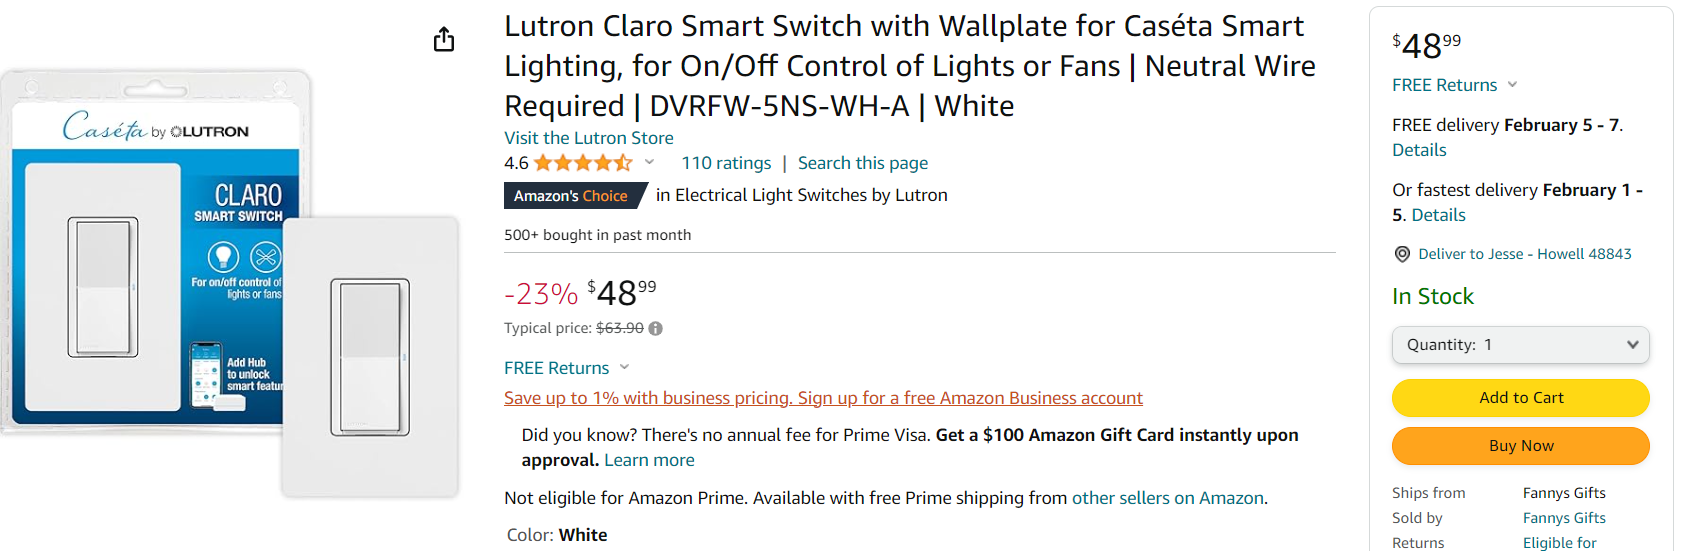 Lutron Claro Smart Switch with Wallplate for Caséta Smart Lighting, for On/Off Control of Lights or Fans | Neutral Wire Required | DVRFW-5NS-WH-A | White $48.99